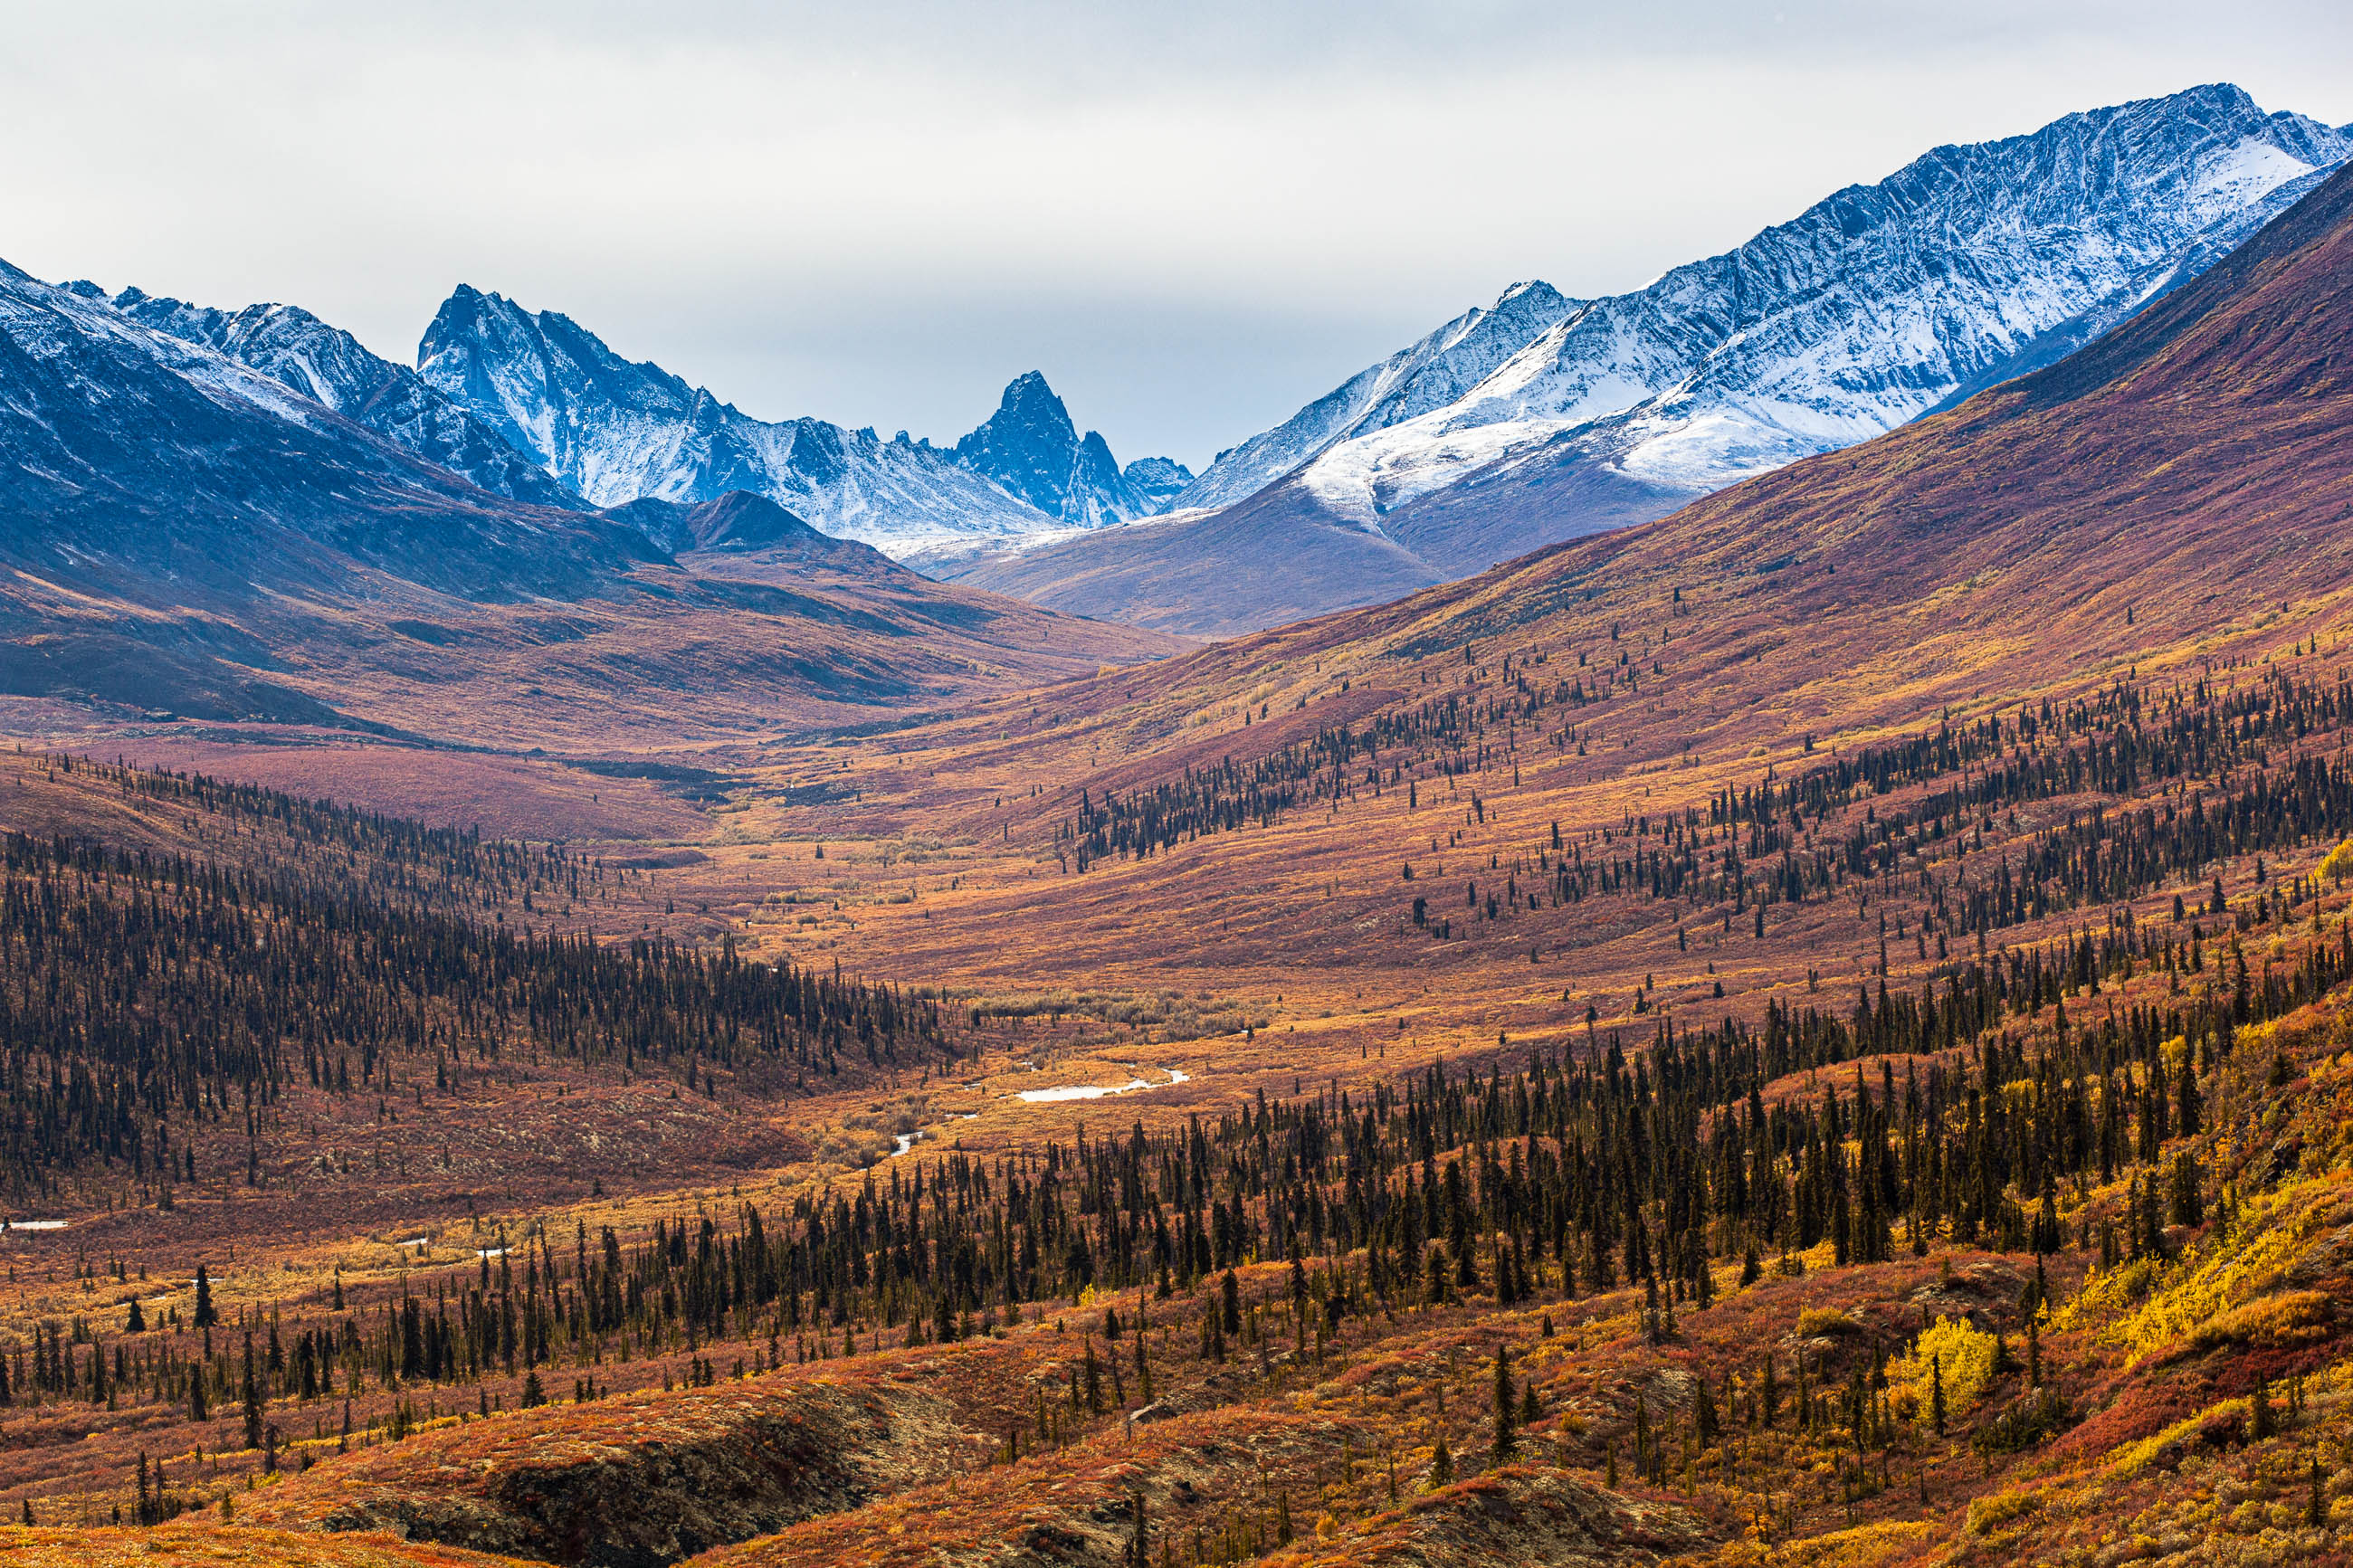 Fall colours against snow capped mountains in Tombstone Territorial Park